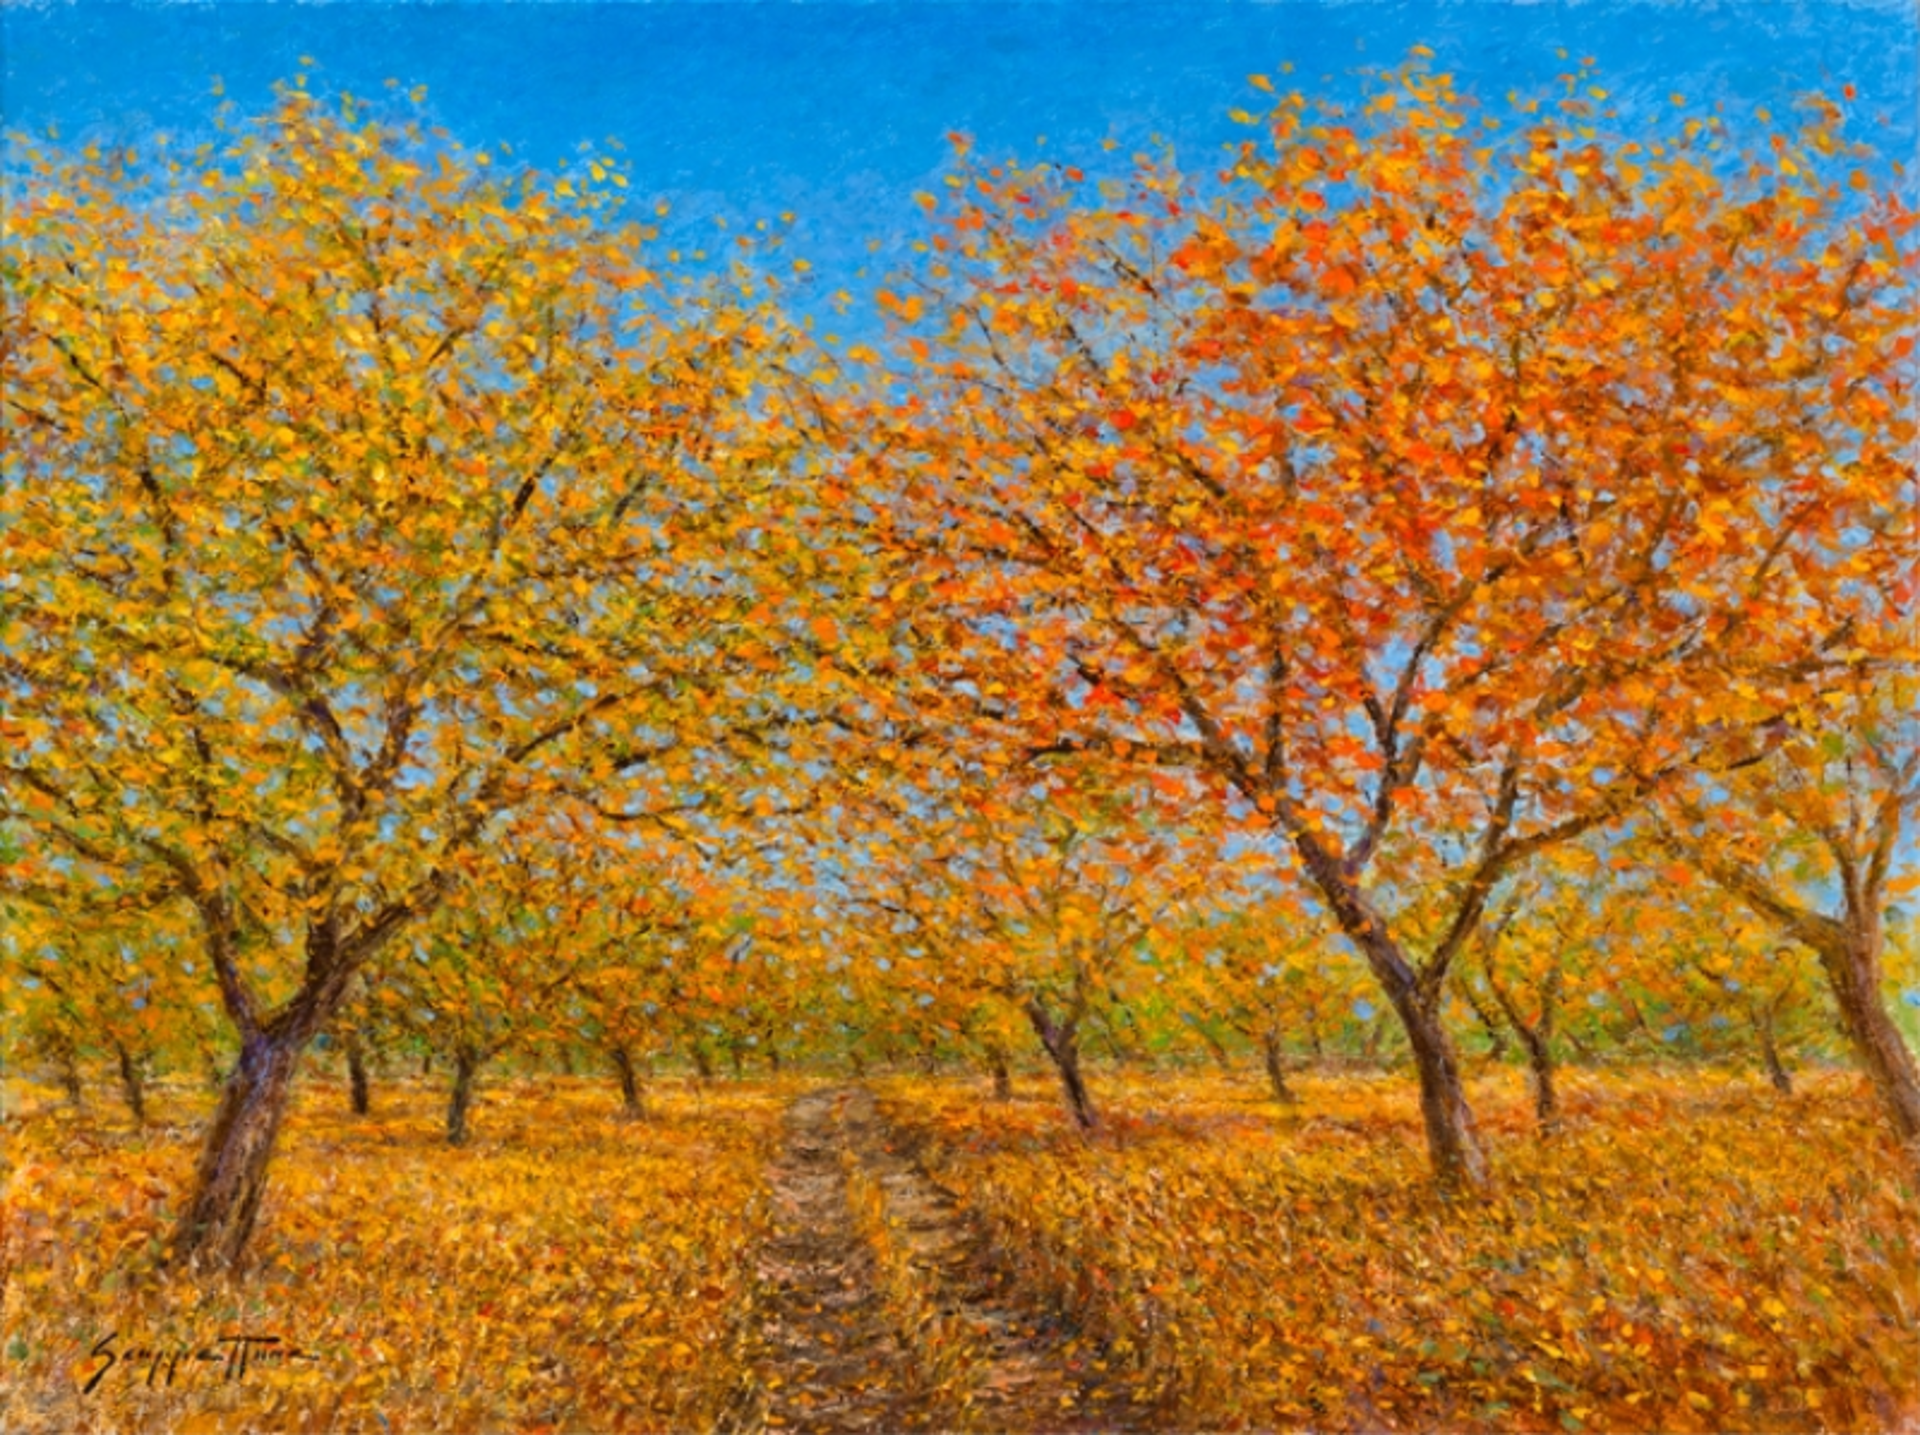 Autumn in the Orchard (AP) by James Scoppettone